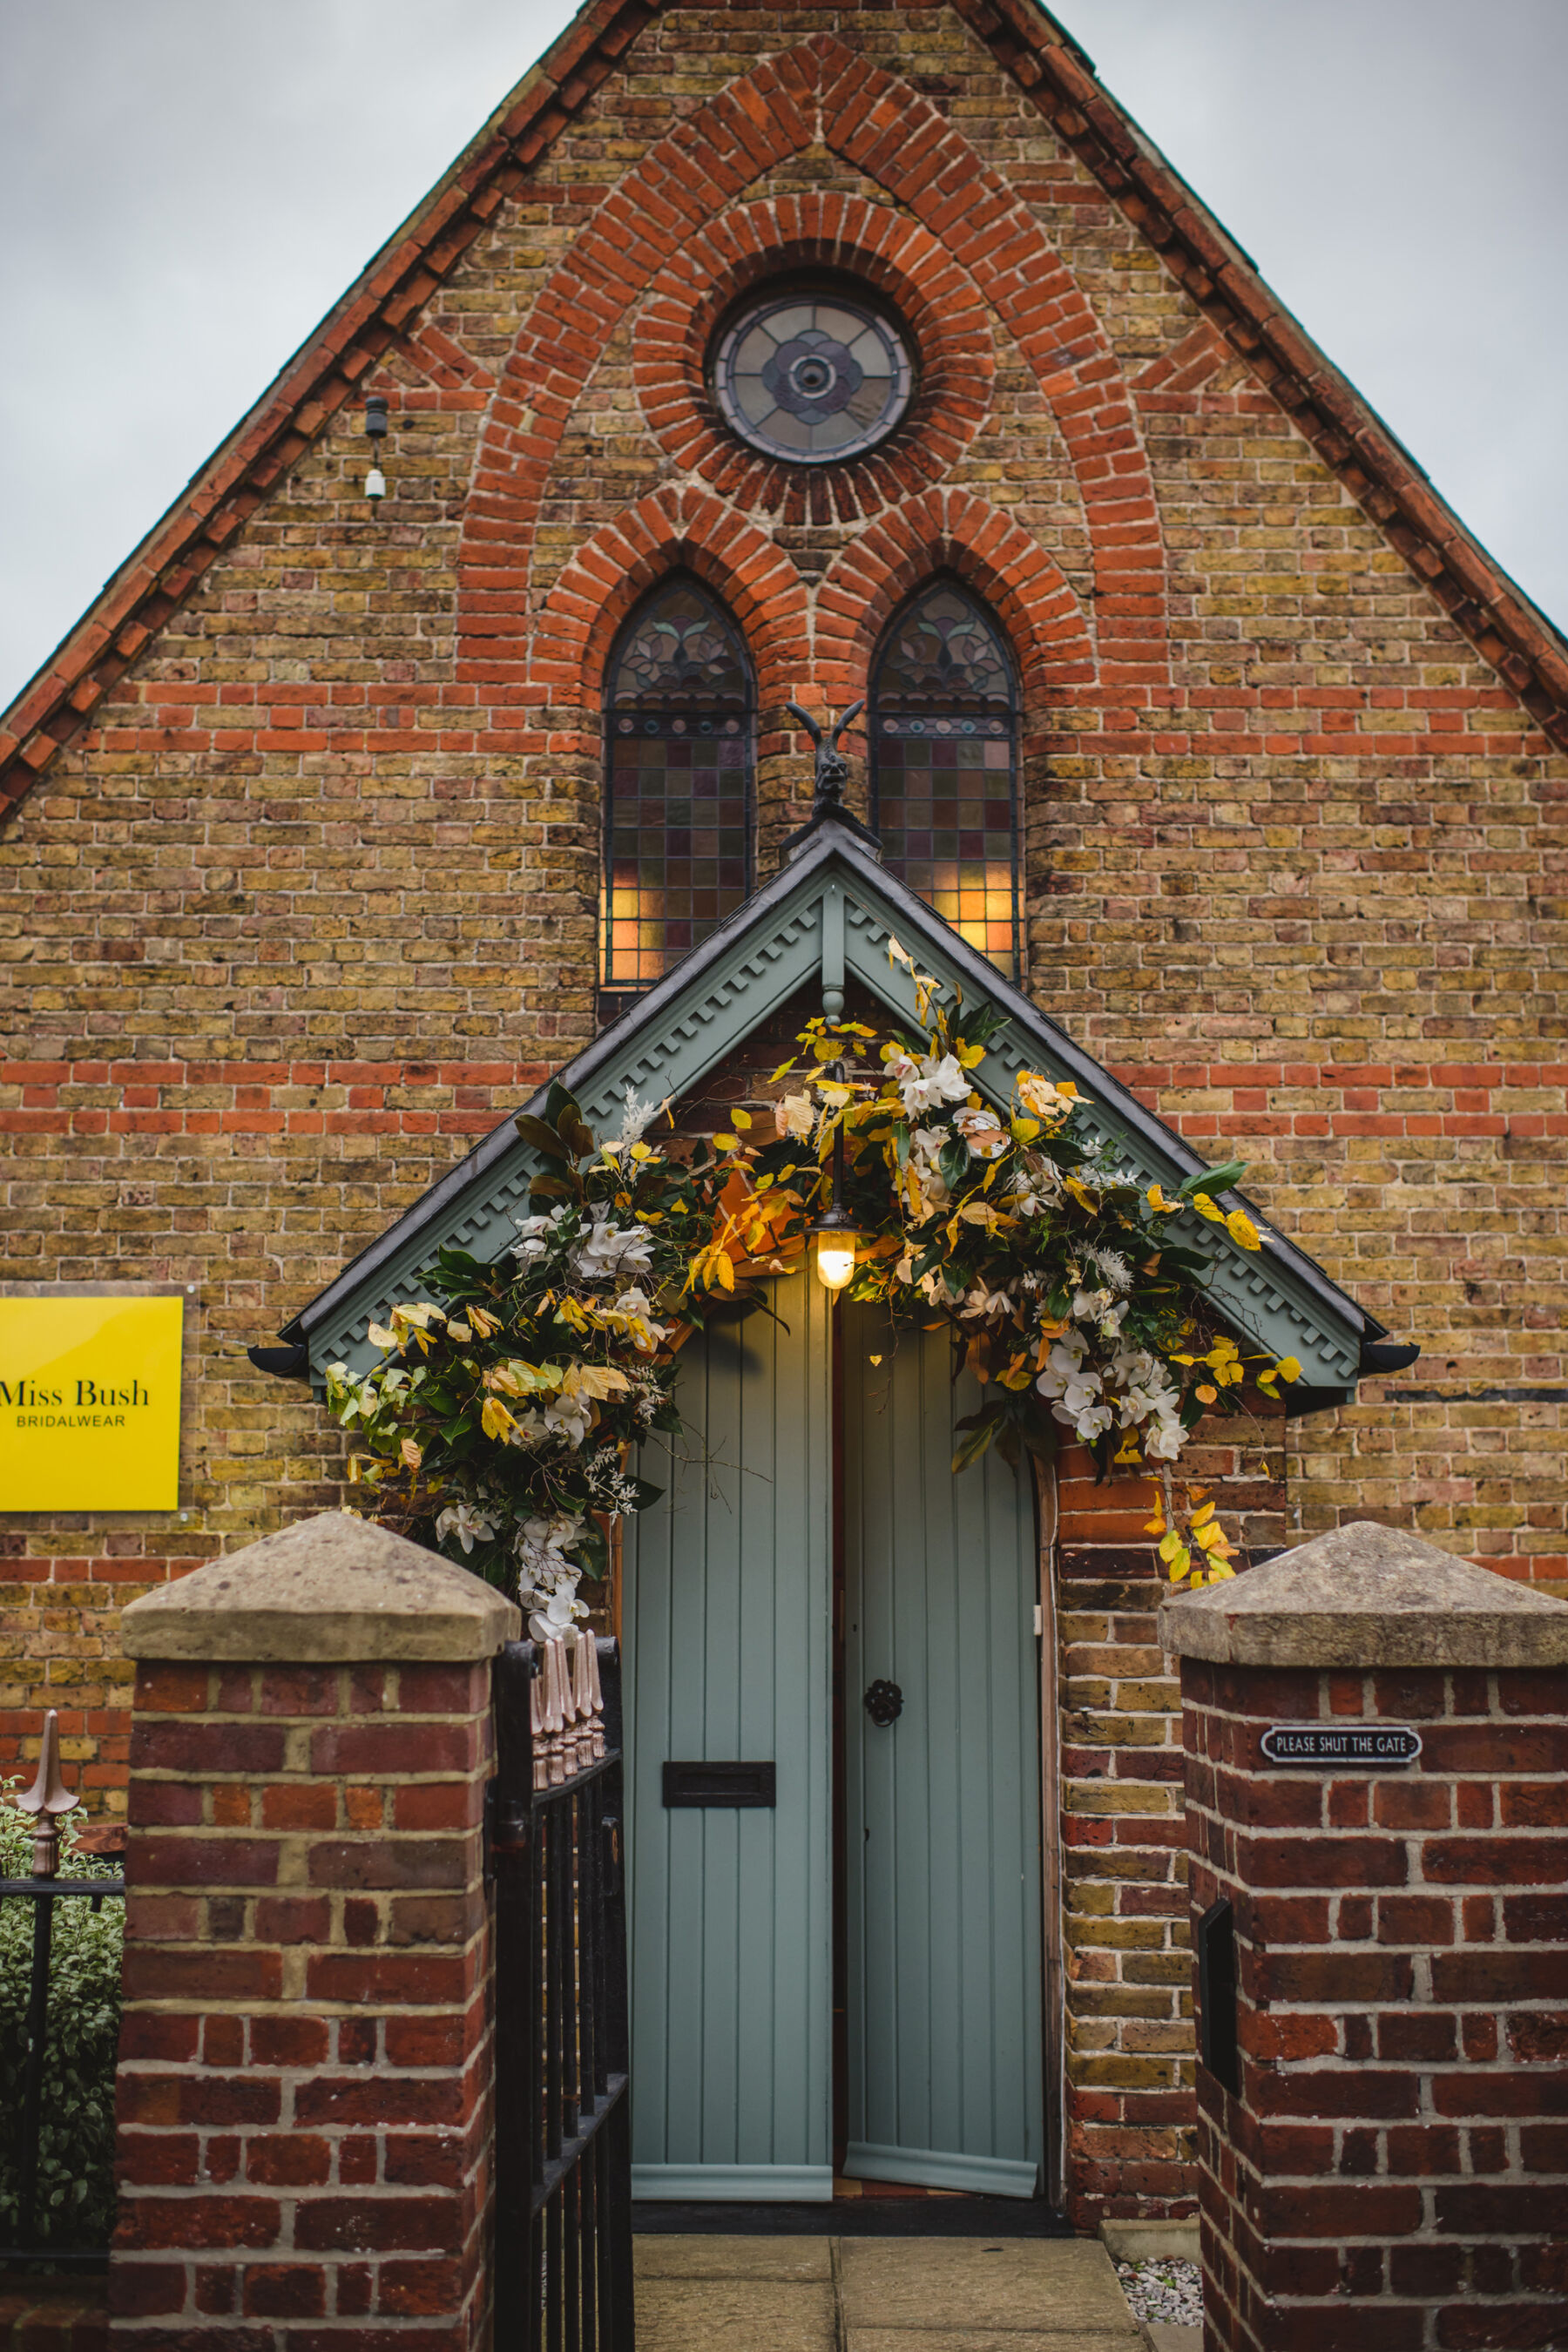 Miss Bush bridal boutique inside a converted chapel, with flowers decorating the entrance.